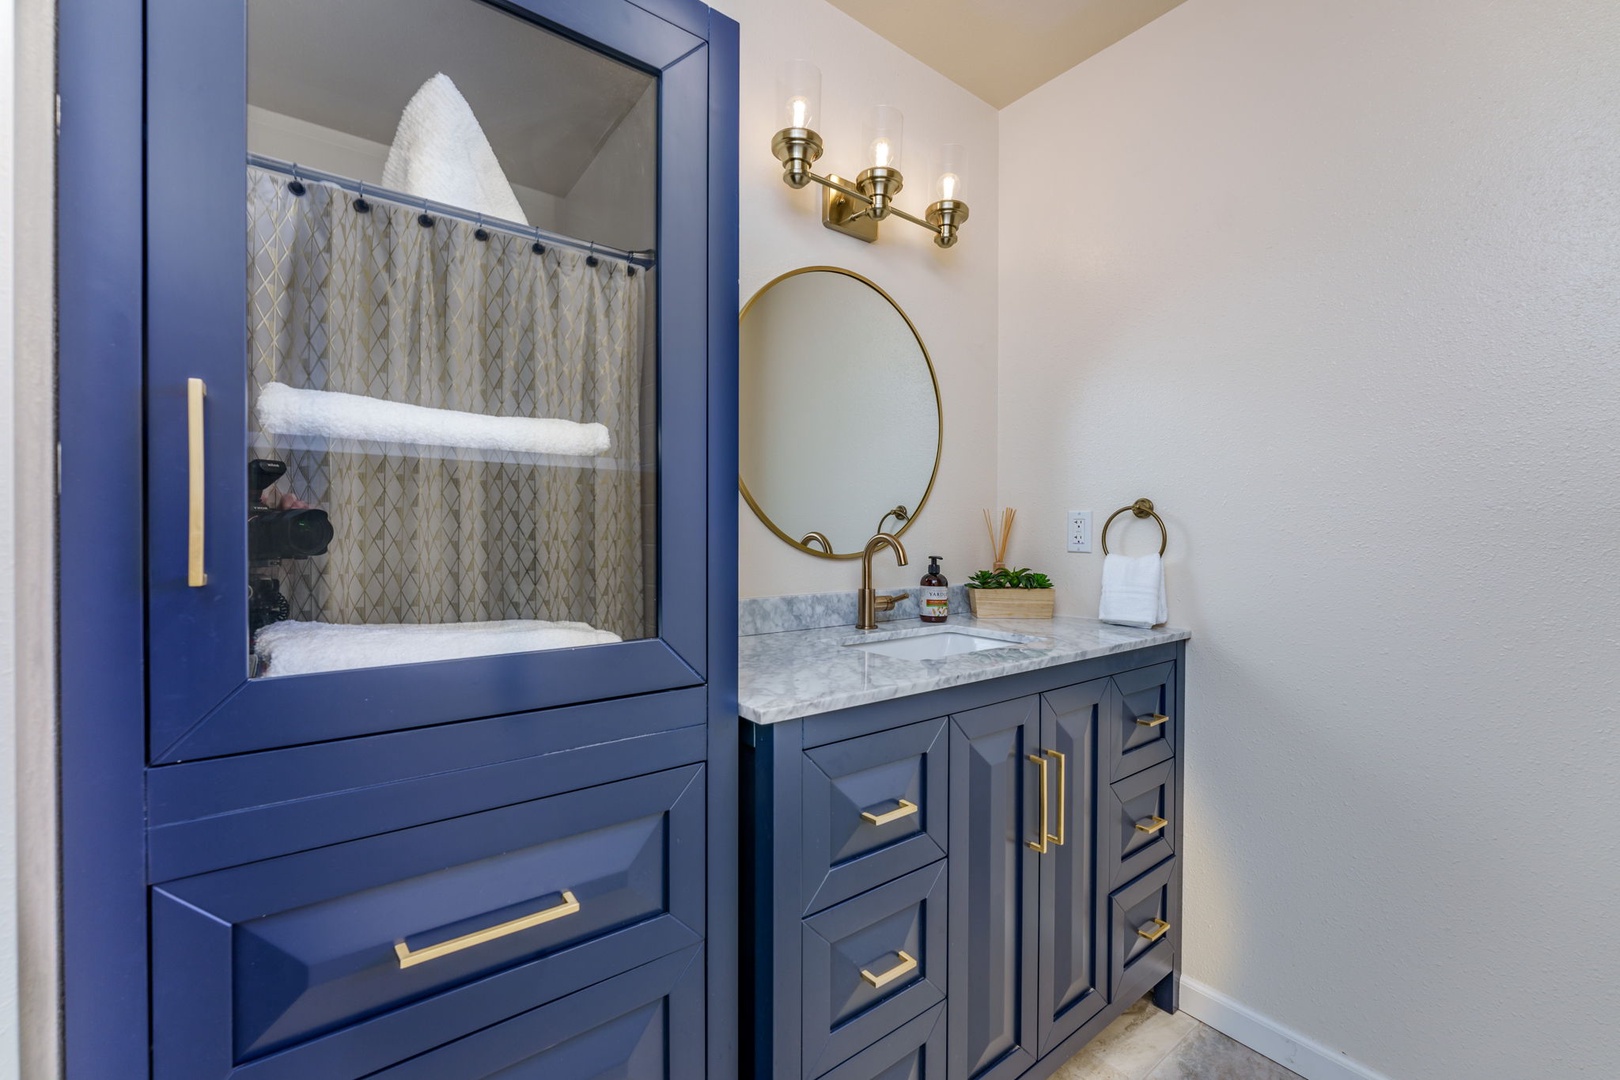 The shared Bathroom offers beautiful finishes, generous storage space, and a Shower/Tub Combo